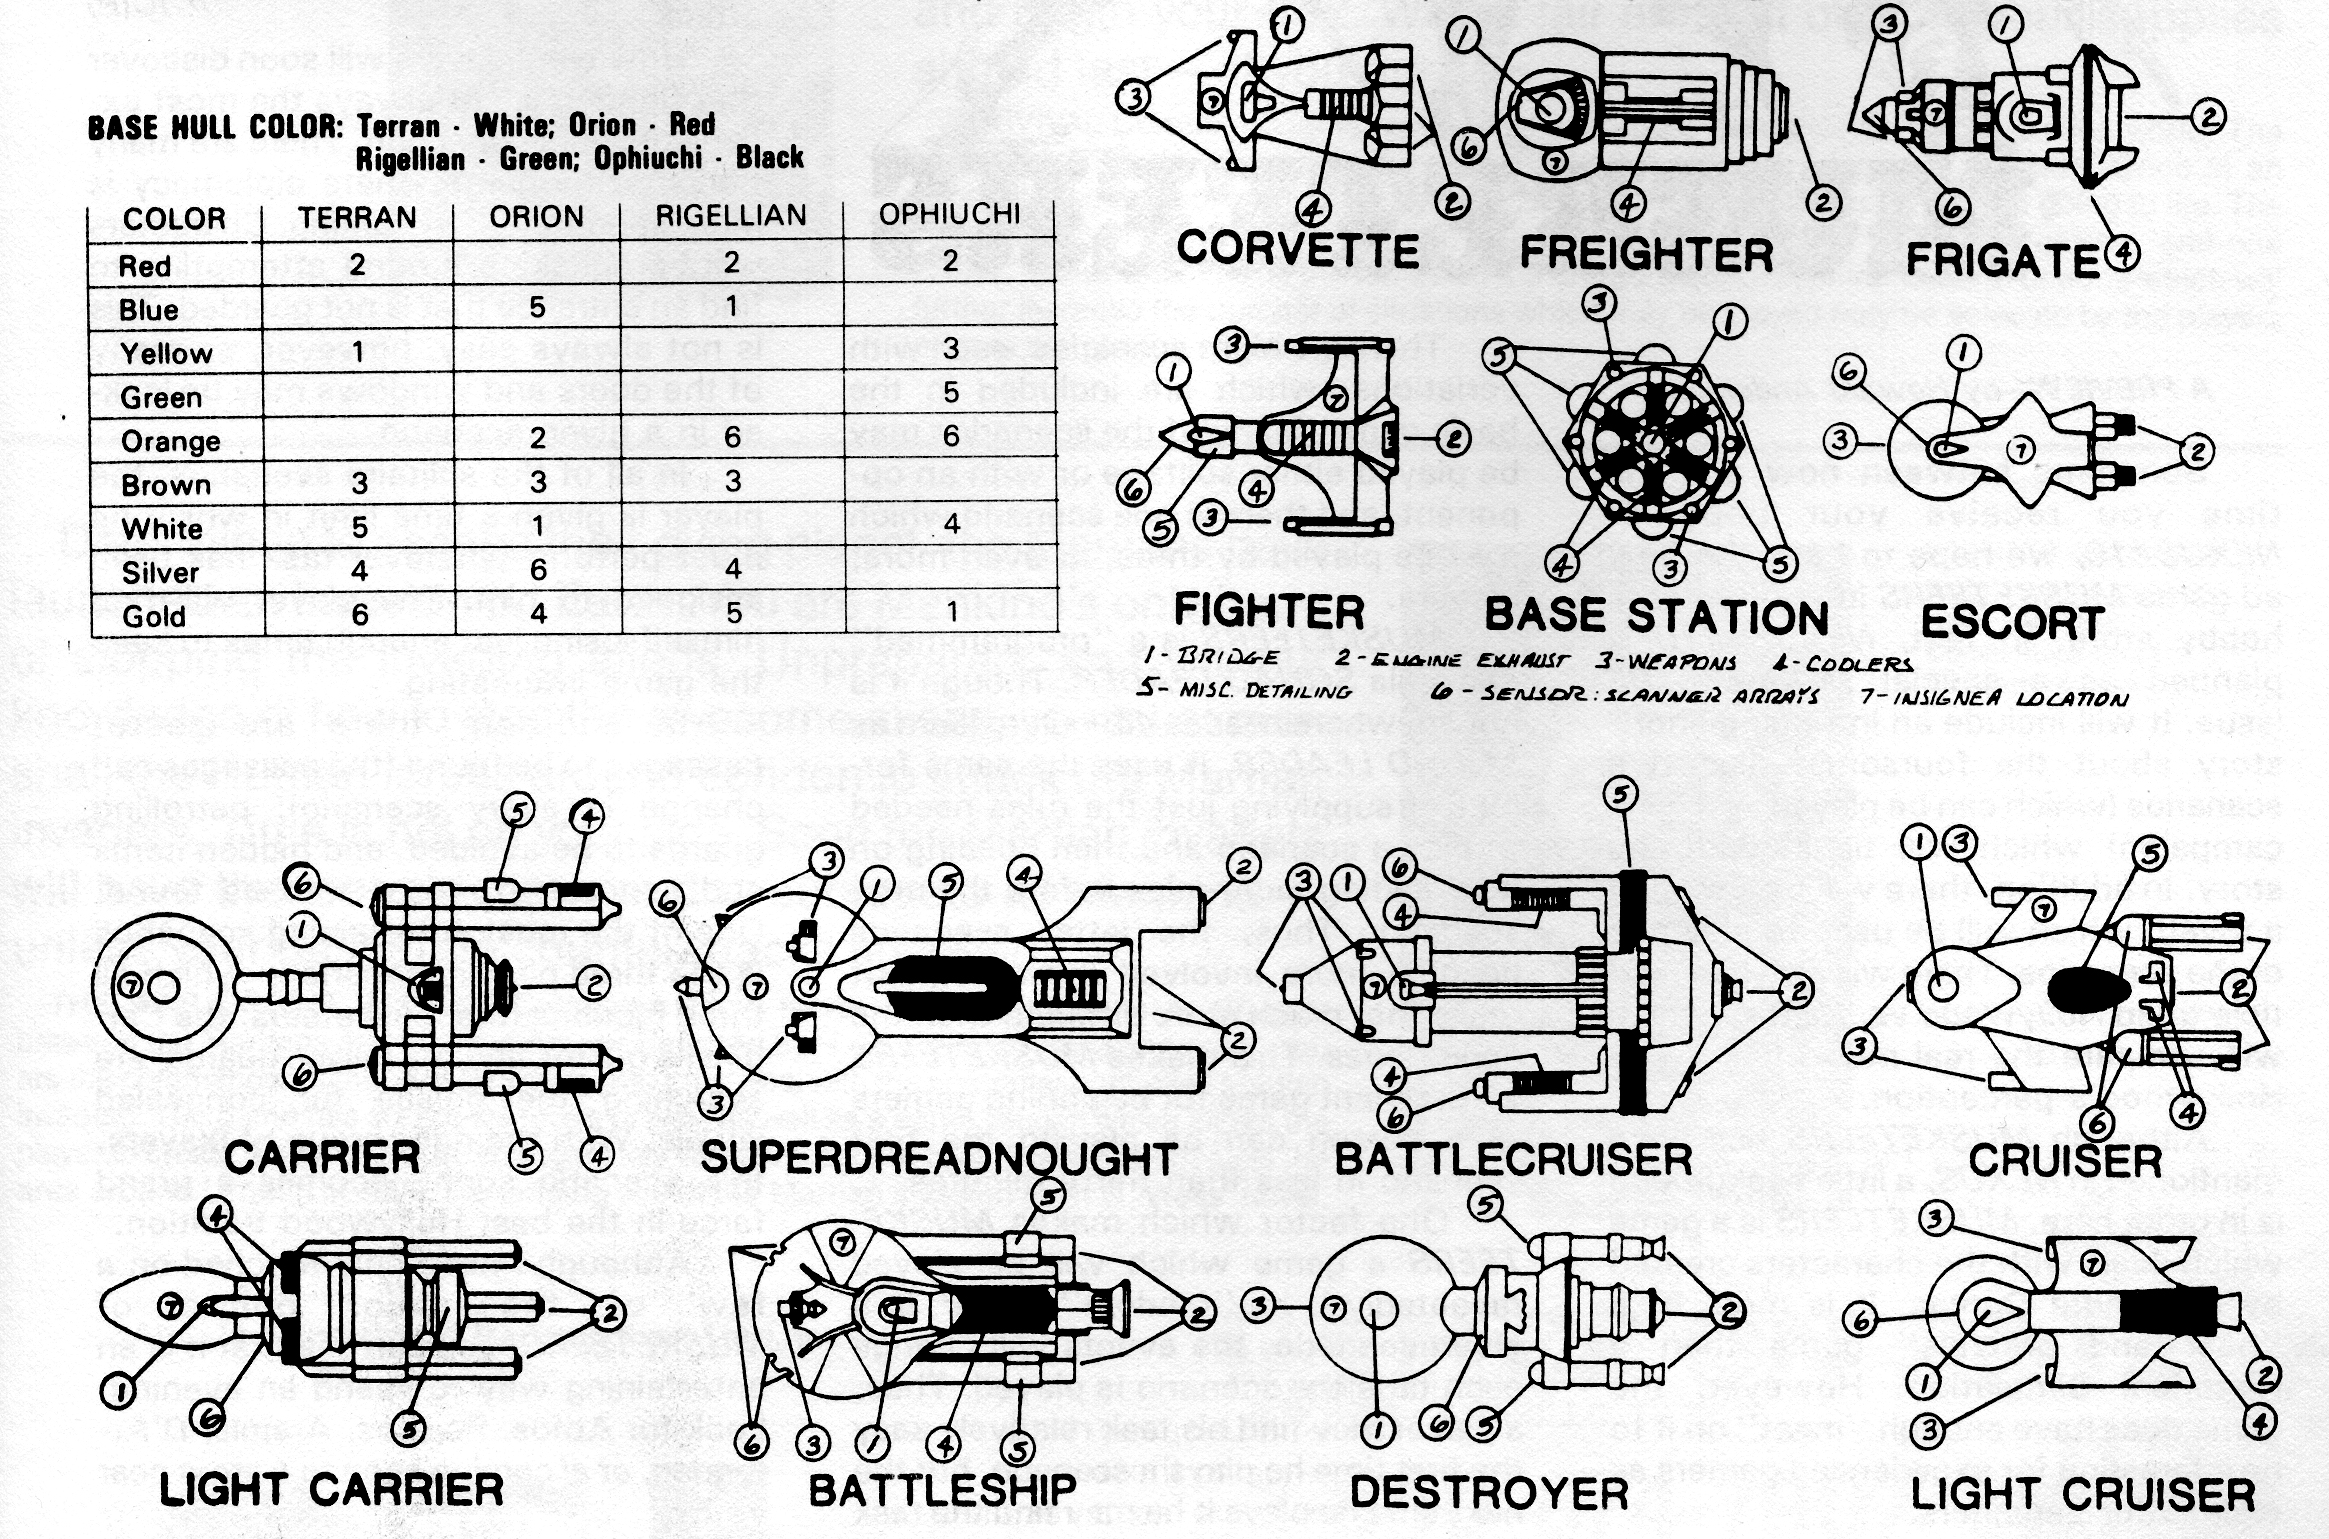 Another jpeg picture of Task Force Games' Starfire miniature information sheet.